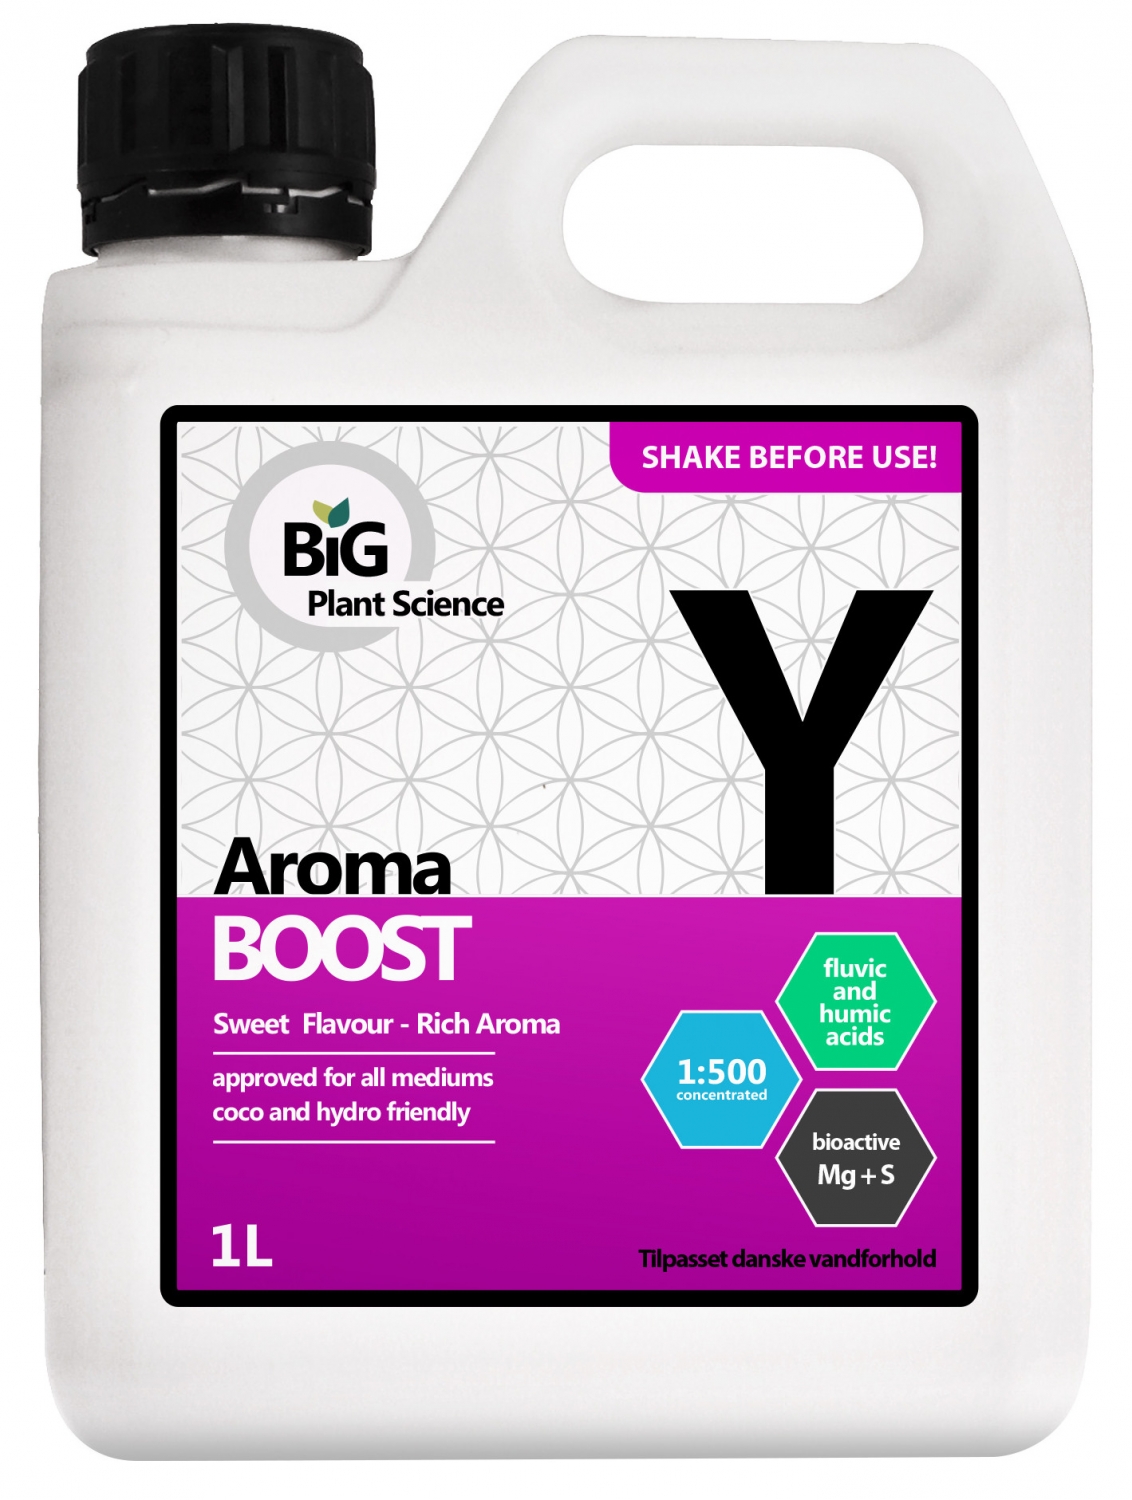 Aroma Boost by Big Plant Science